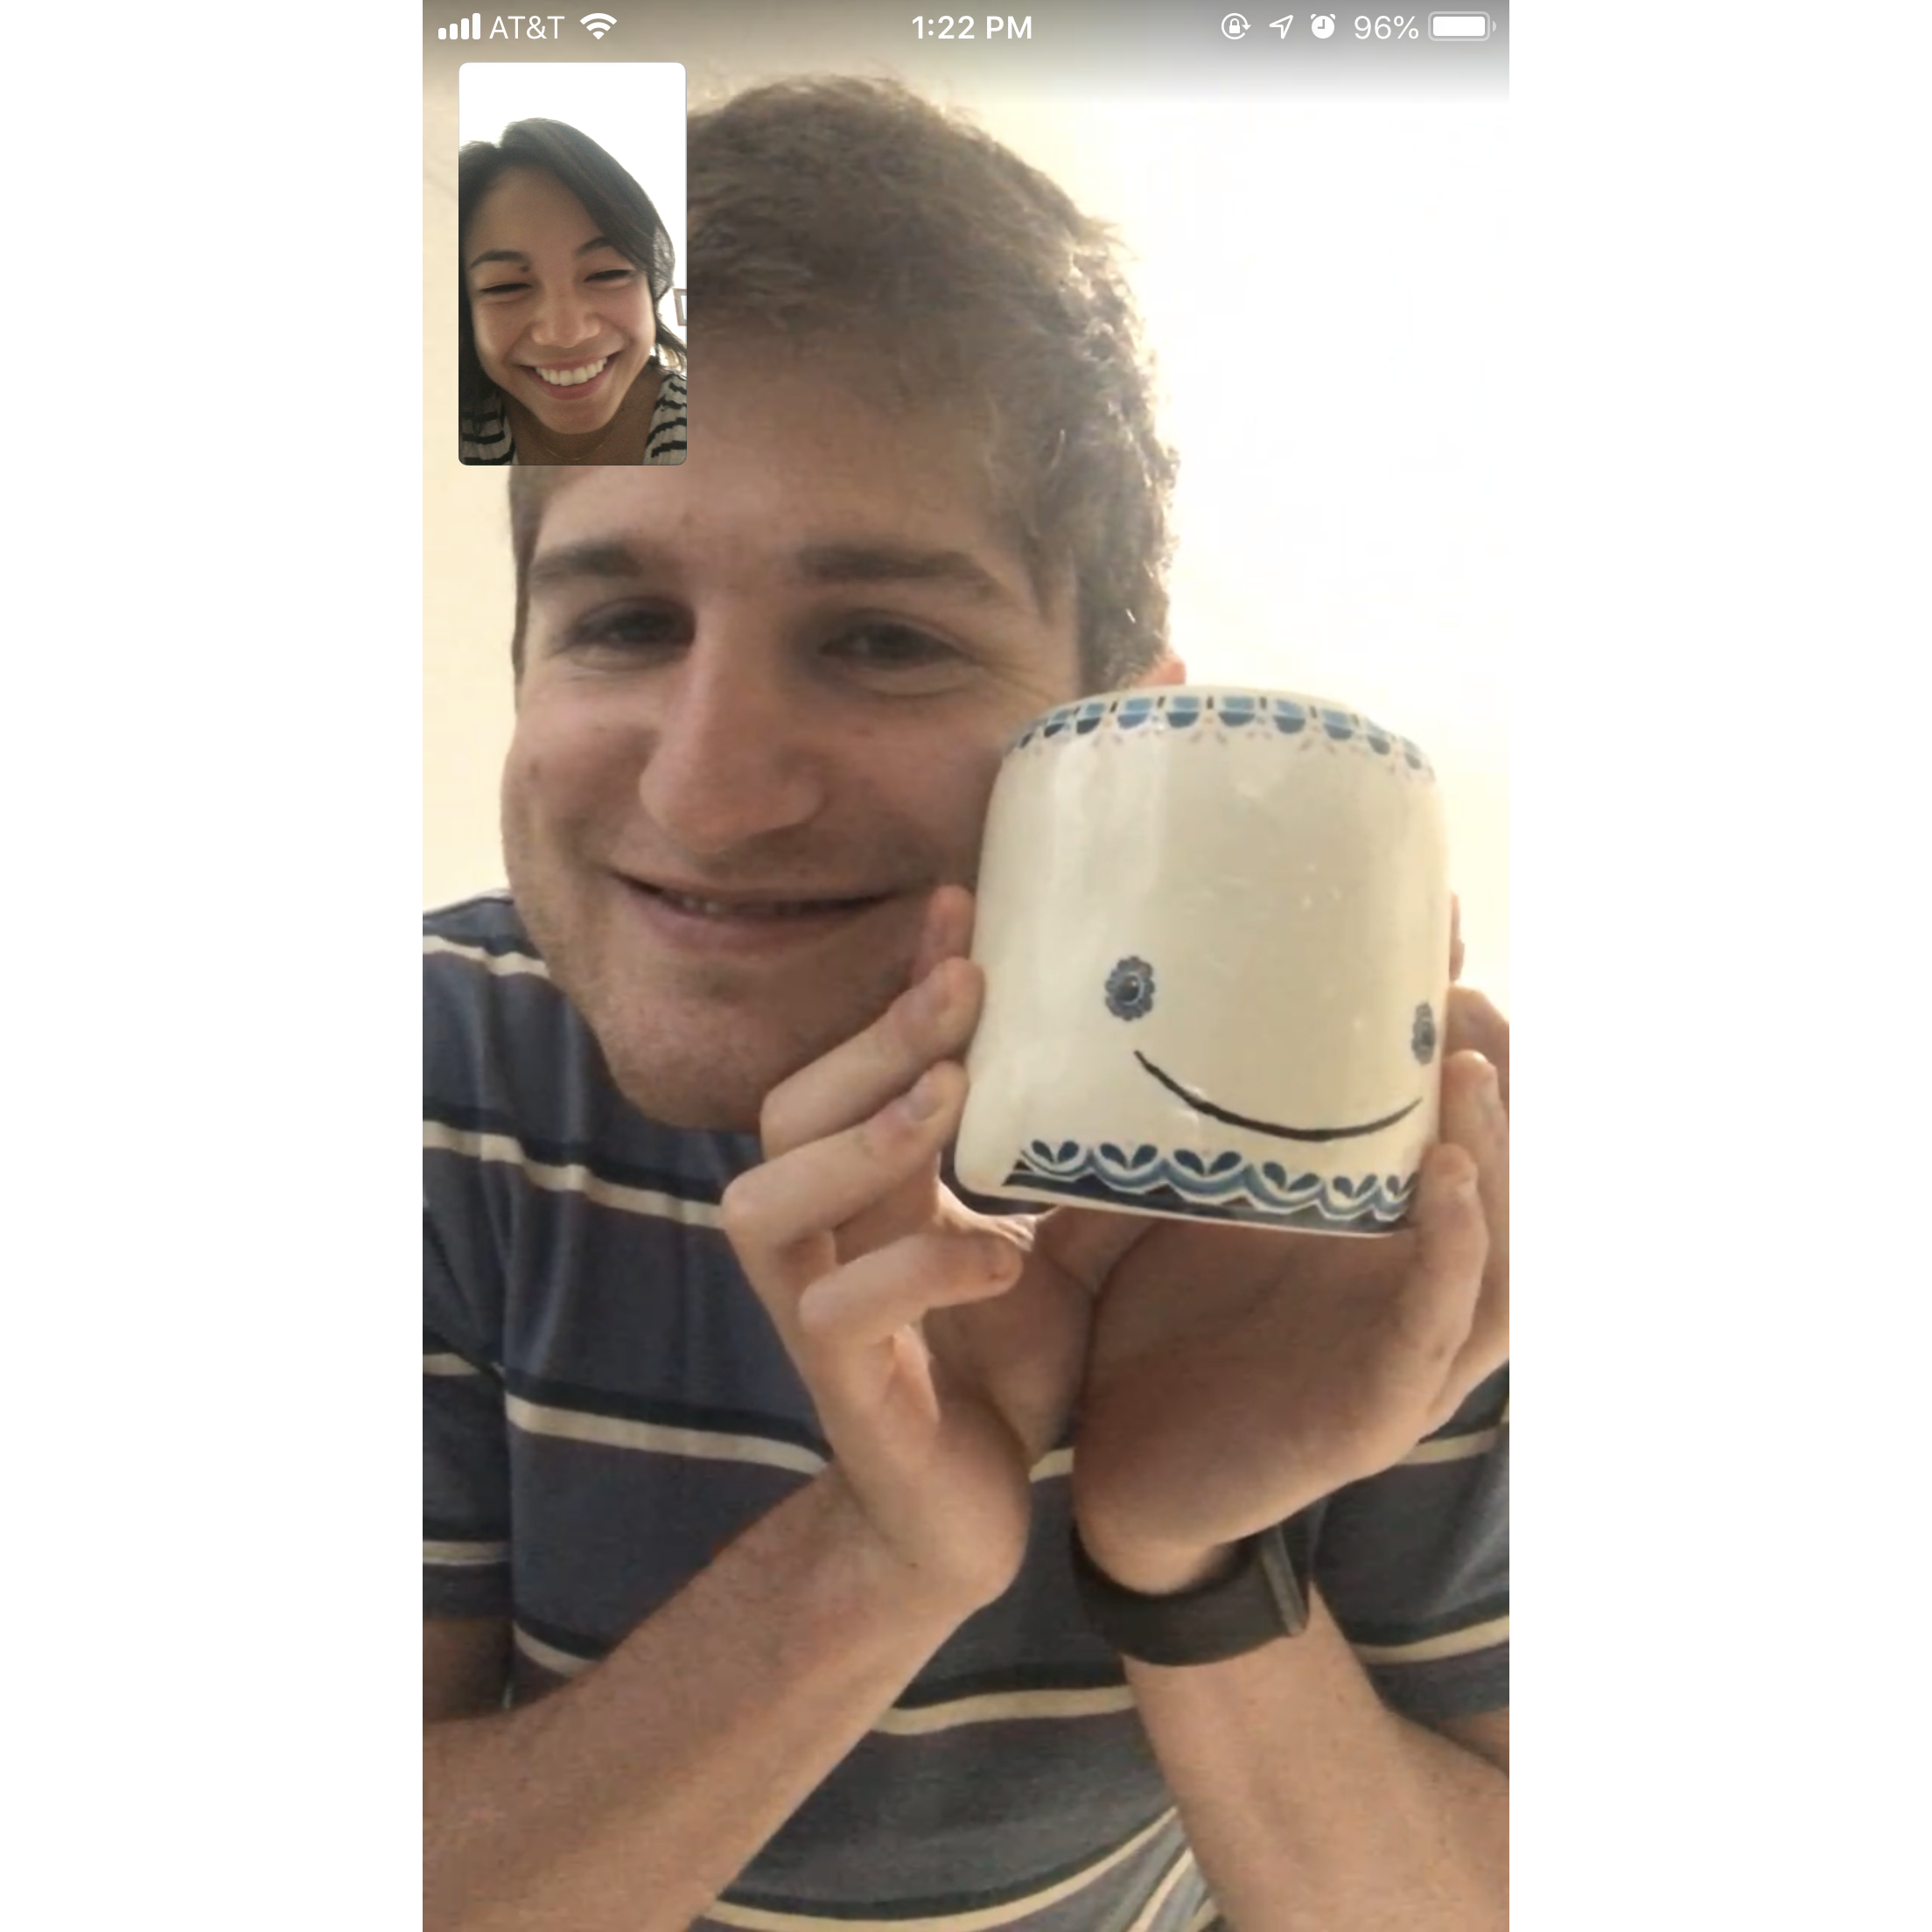 One of many Facetimes during our 2.5 years of long distance